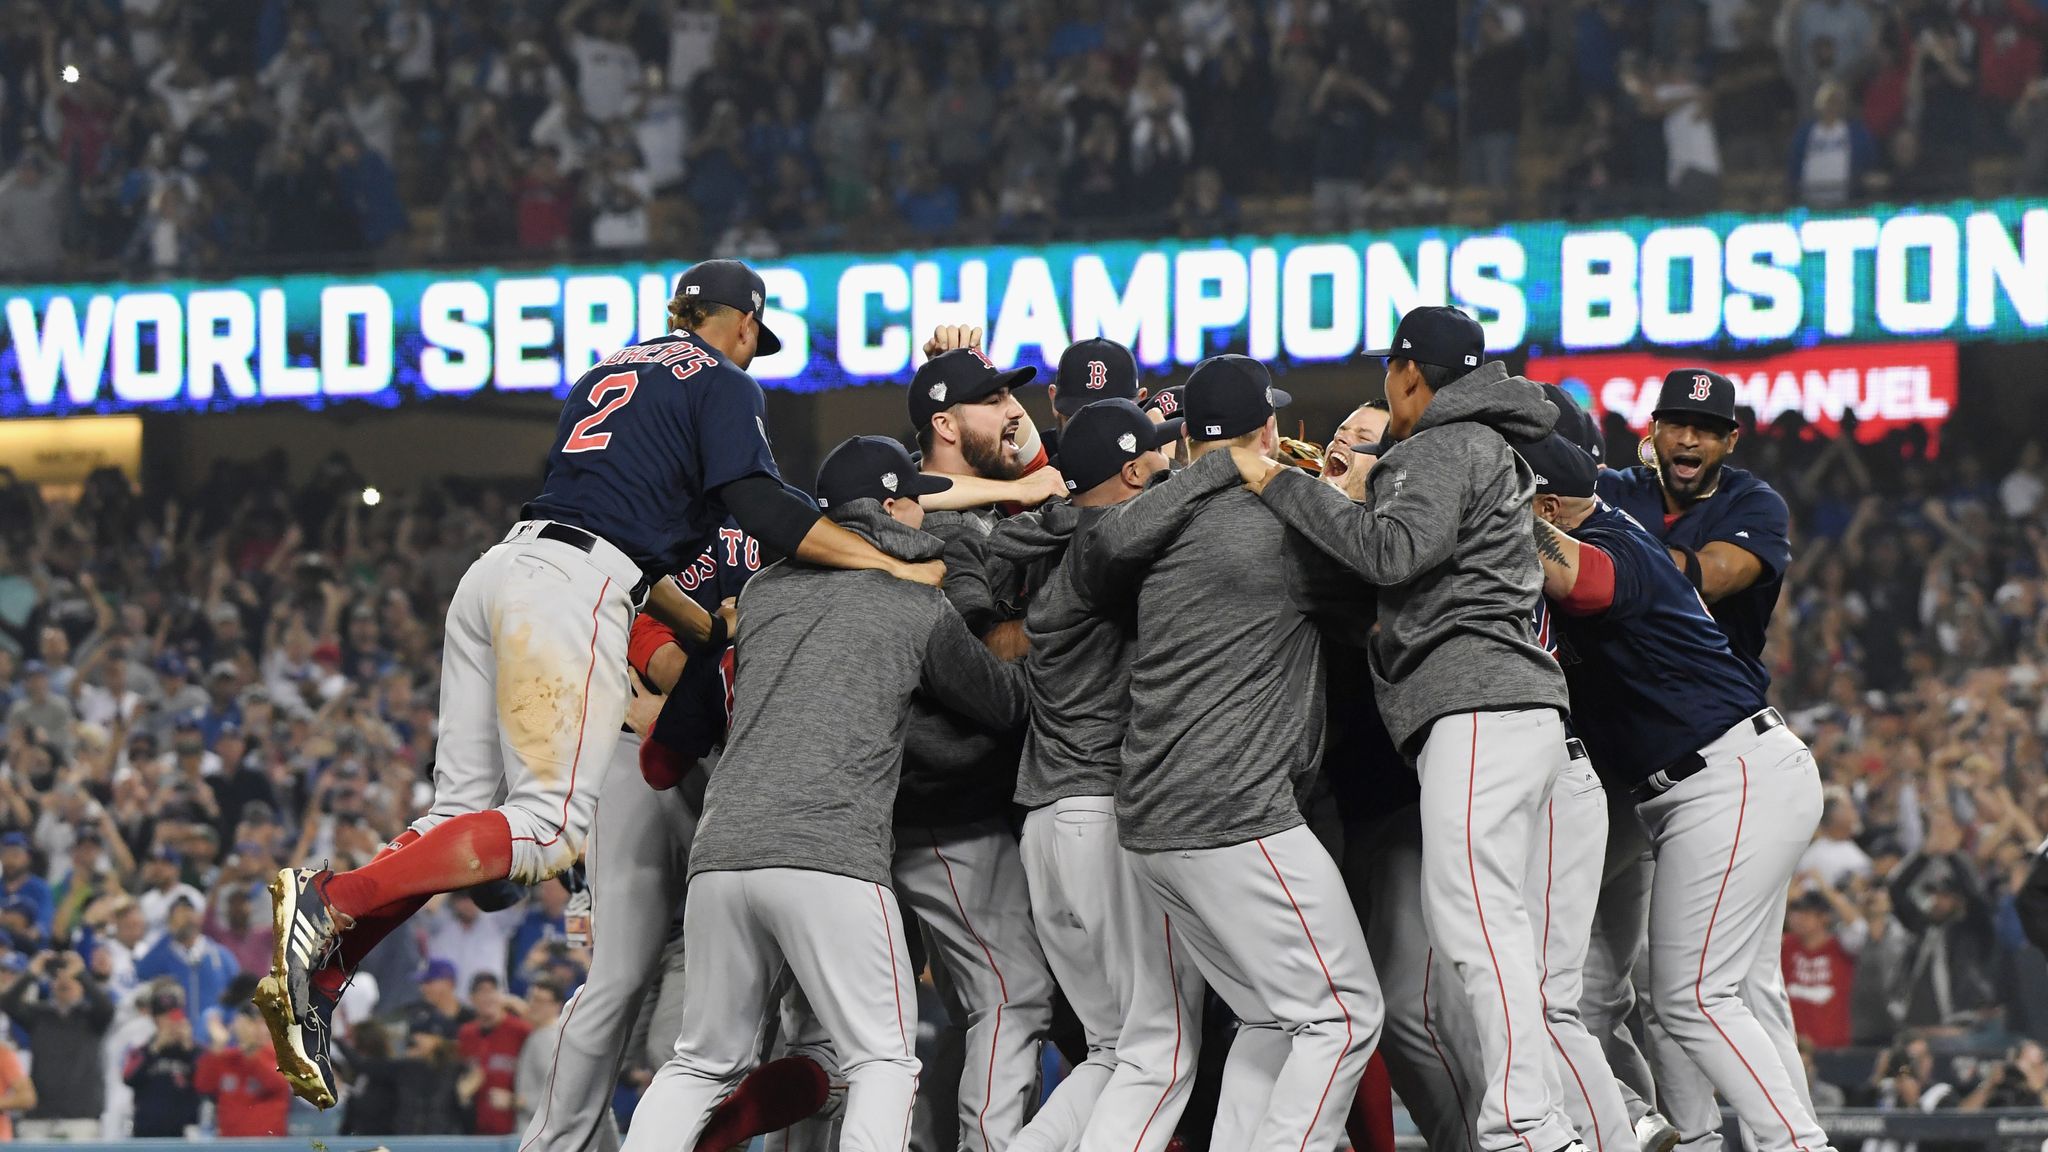 Red Sox defeat Dodgers in Game 5 to win the World Series – NBC Sports Boston